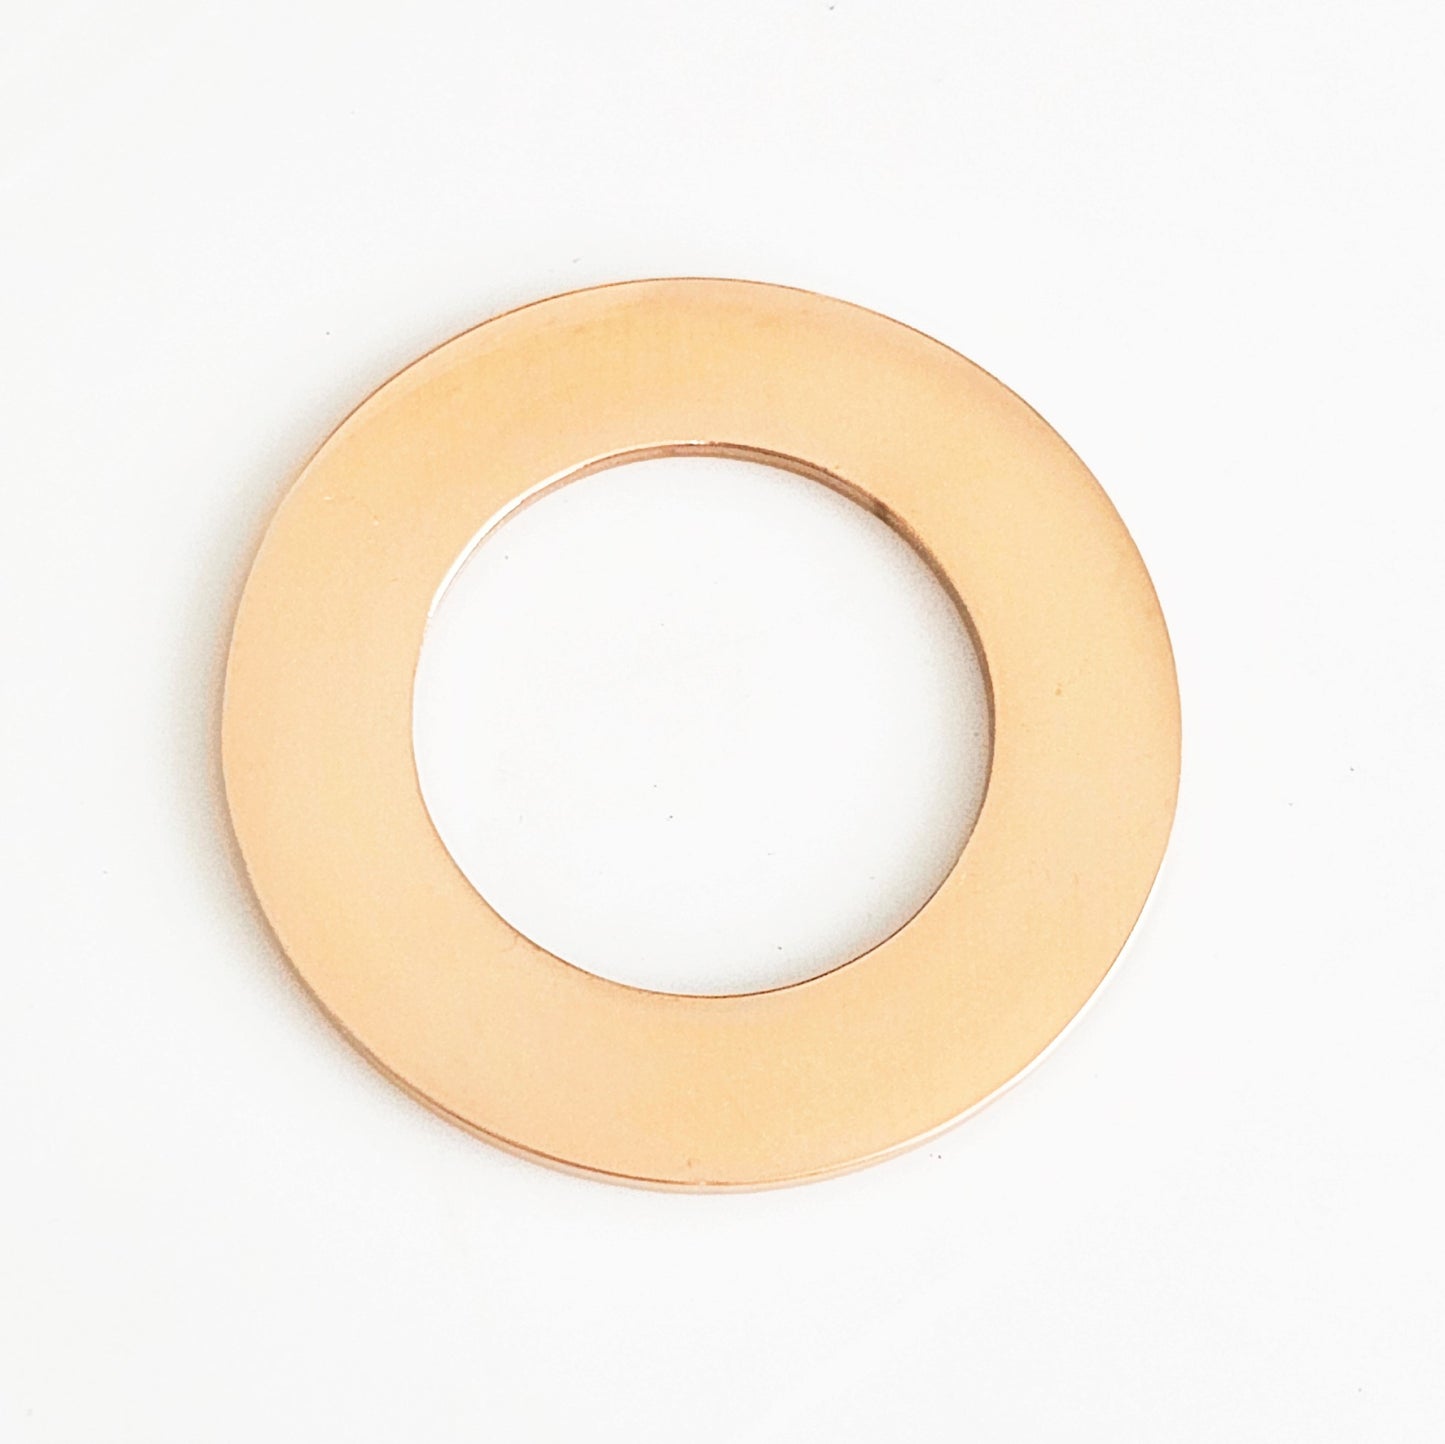 Rose Gold Plated Stainless Steel - 1 1/4" Washer (no hole)